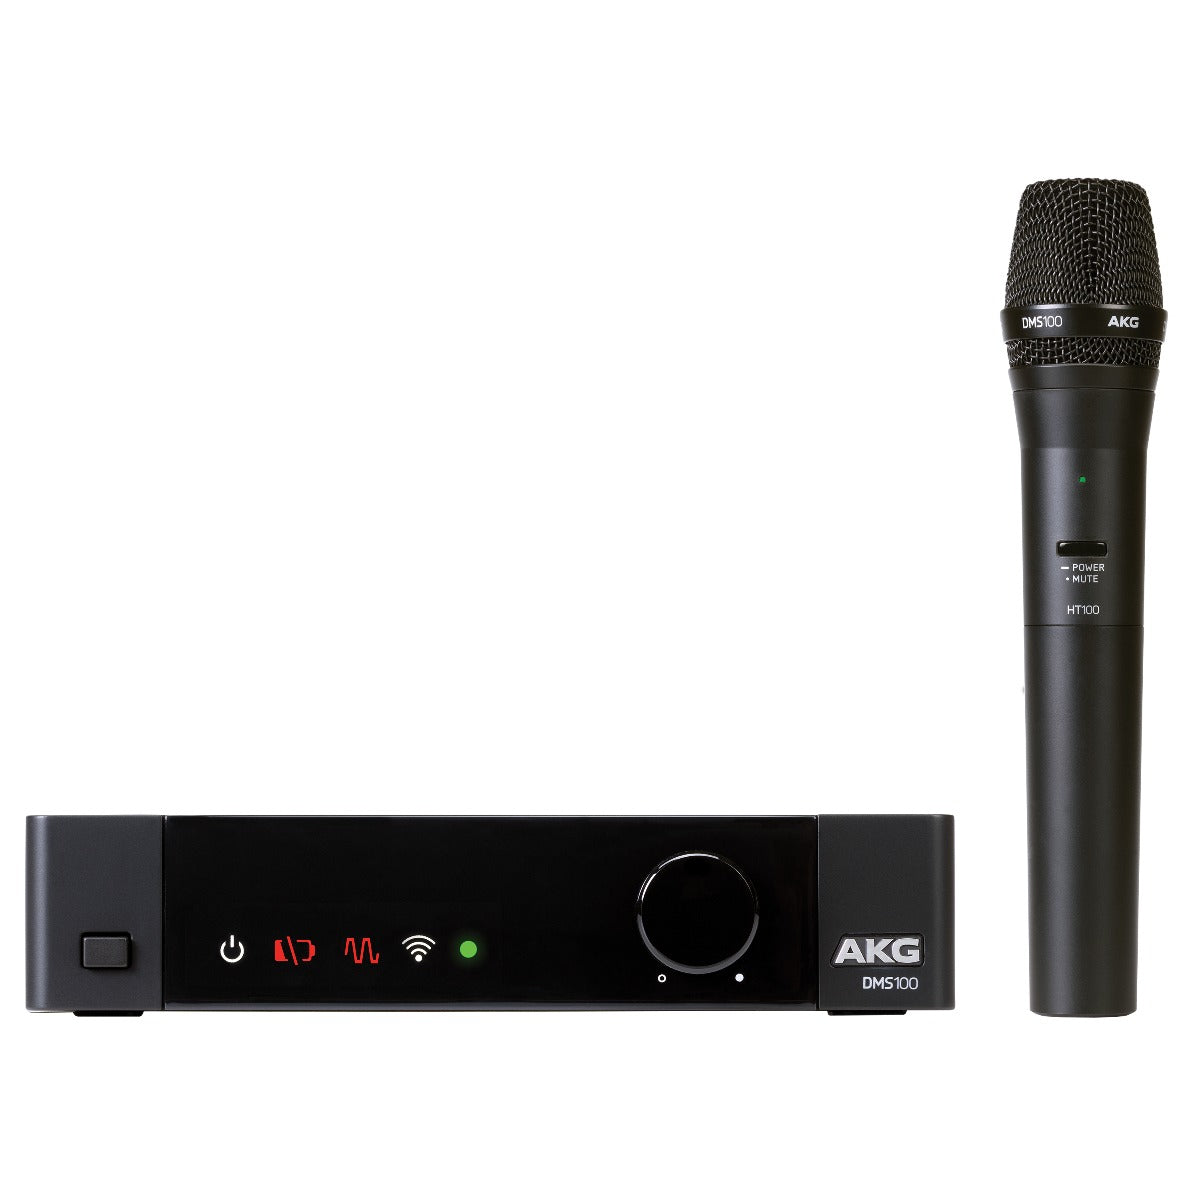 Image of the AKG DMS100 Handheld Wireless Microphone System